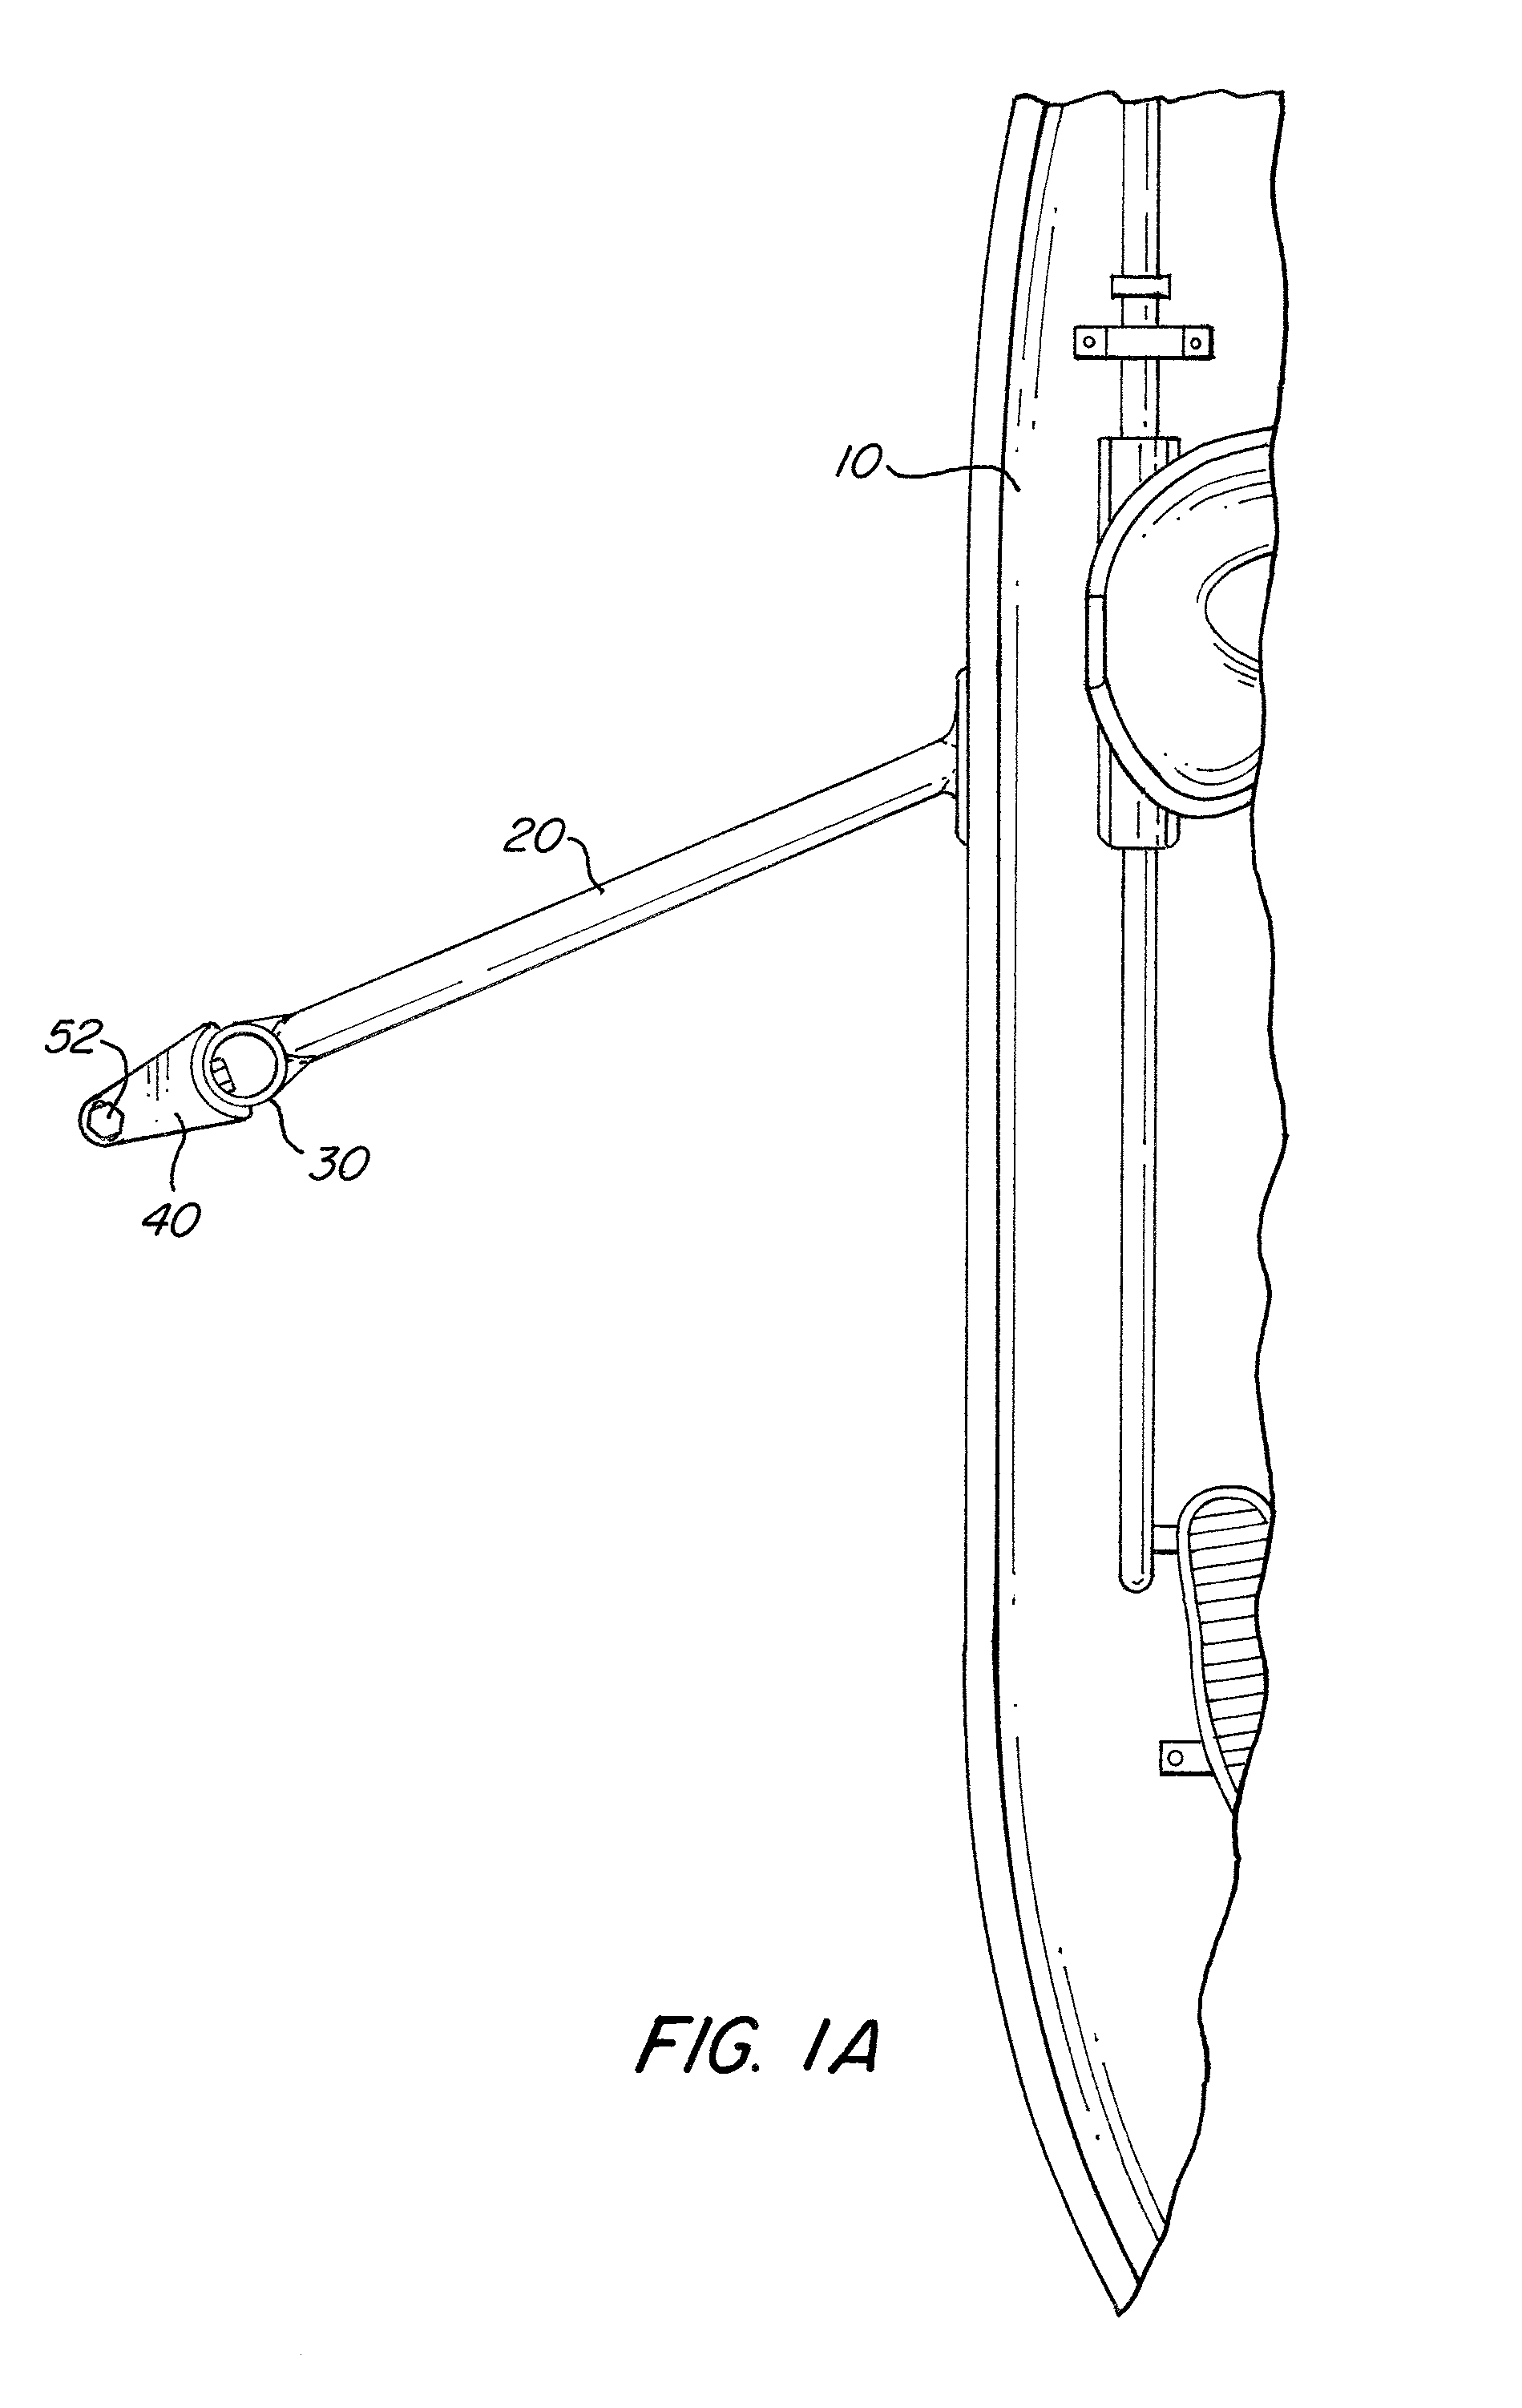 Adjustable rigging system for a rowing boat